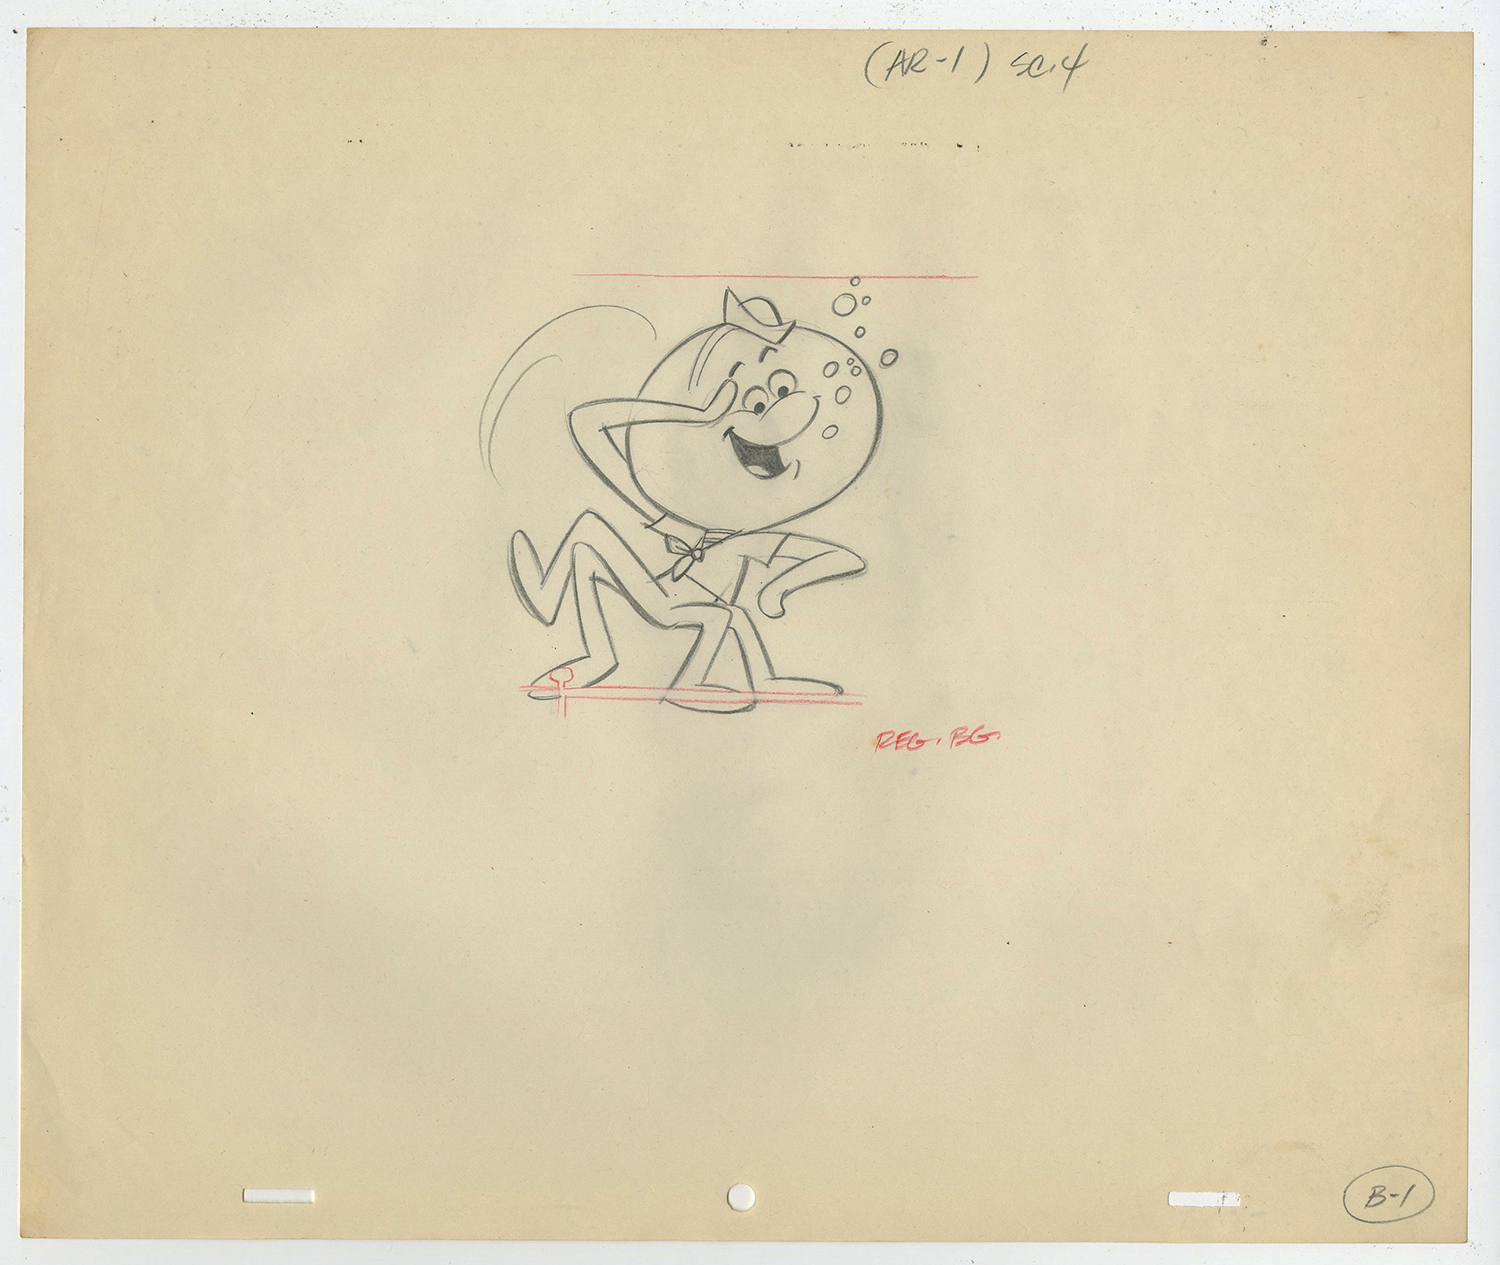 Squiddly Diddly Production Drawing - ID: jansquiddly9070 | Van Eaton ...